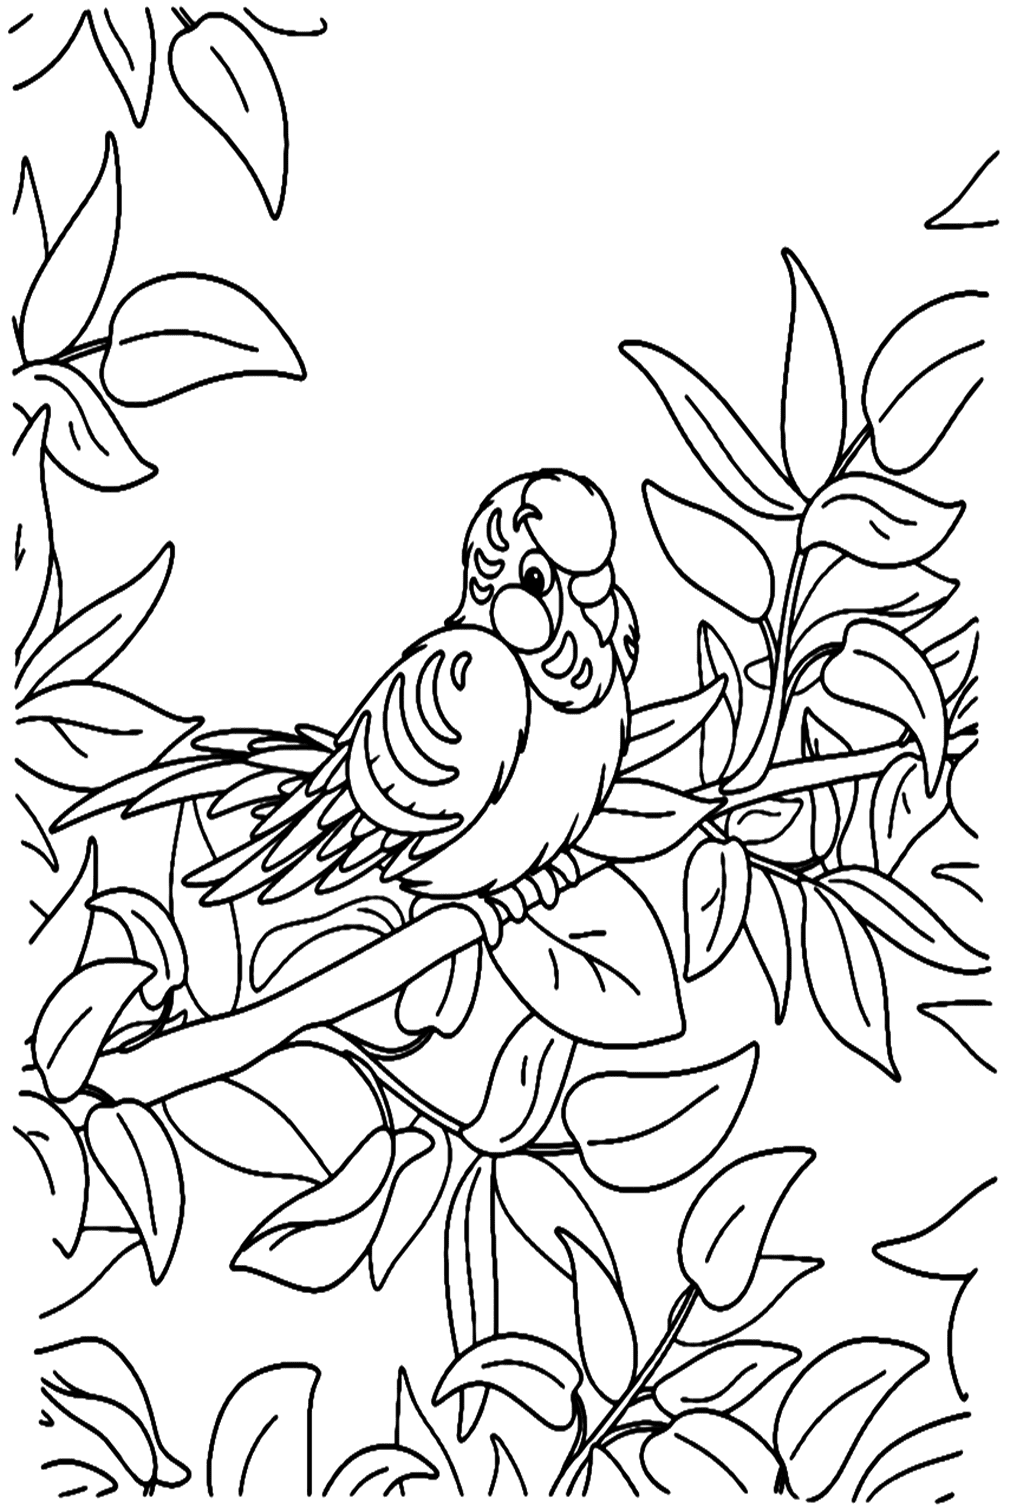 Cute Parakeet Coloring Page from Parakeet